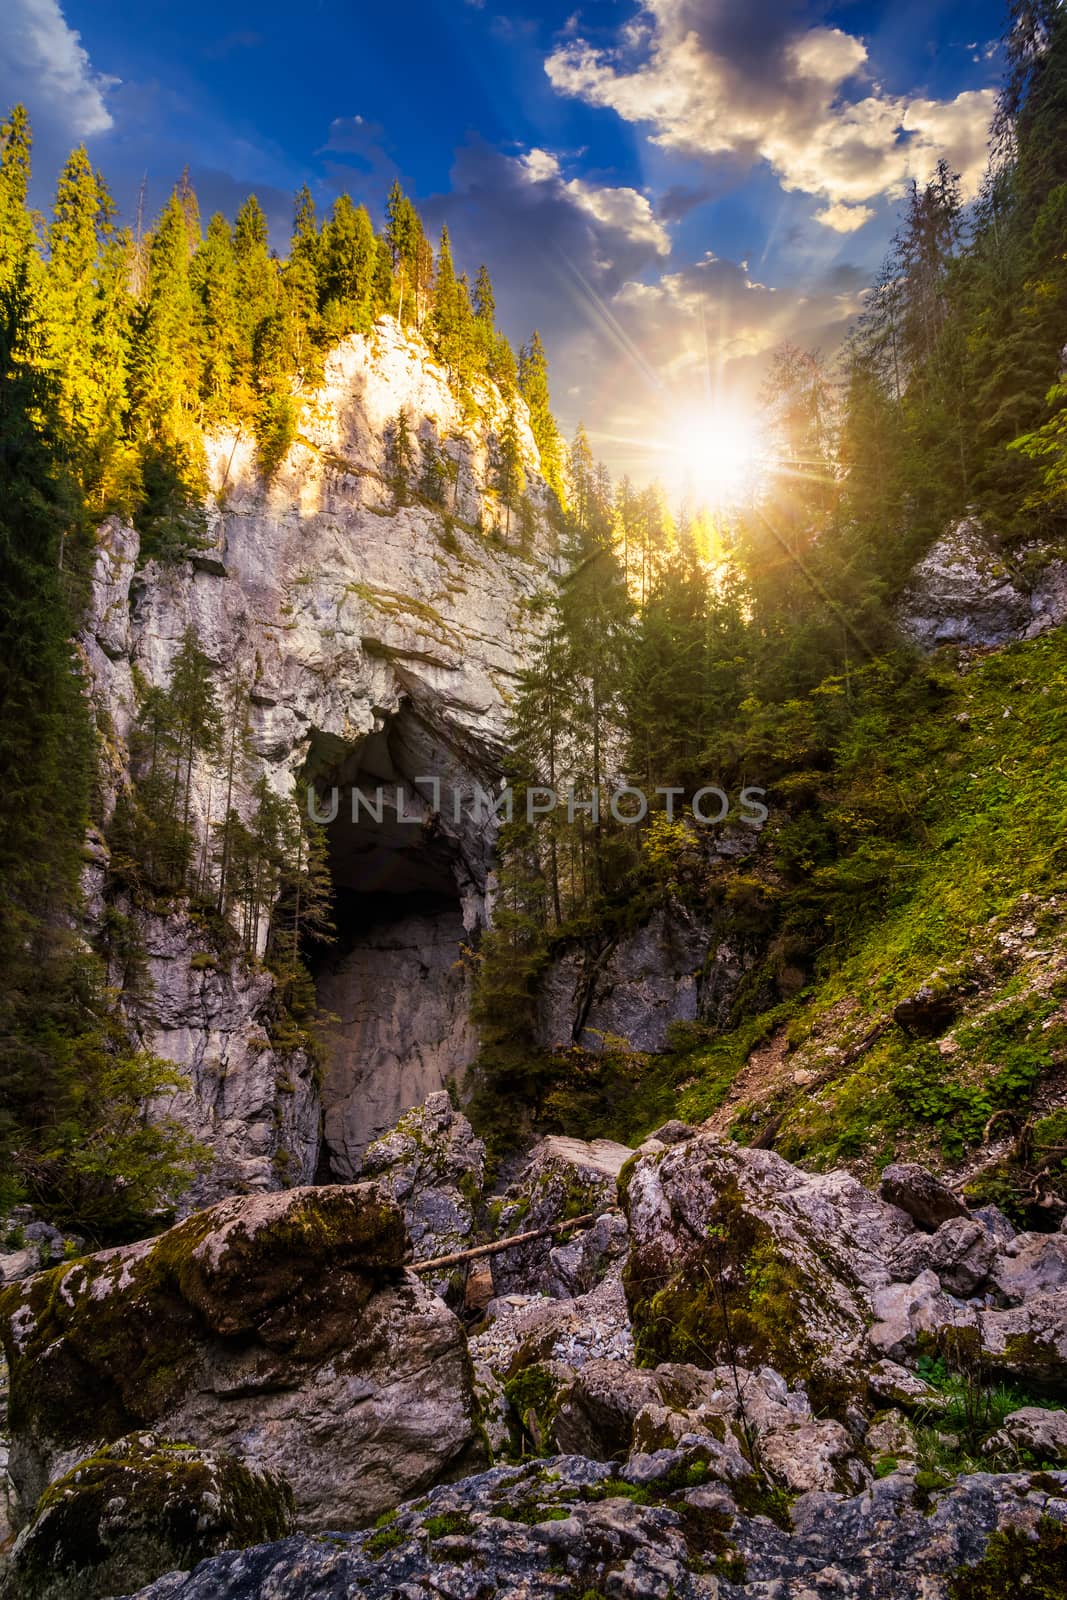 Cetatile cave sculpted by river in romanian mountains at sunset by Pellinni